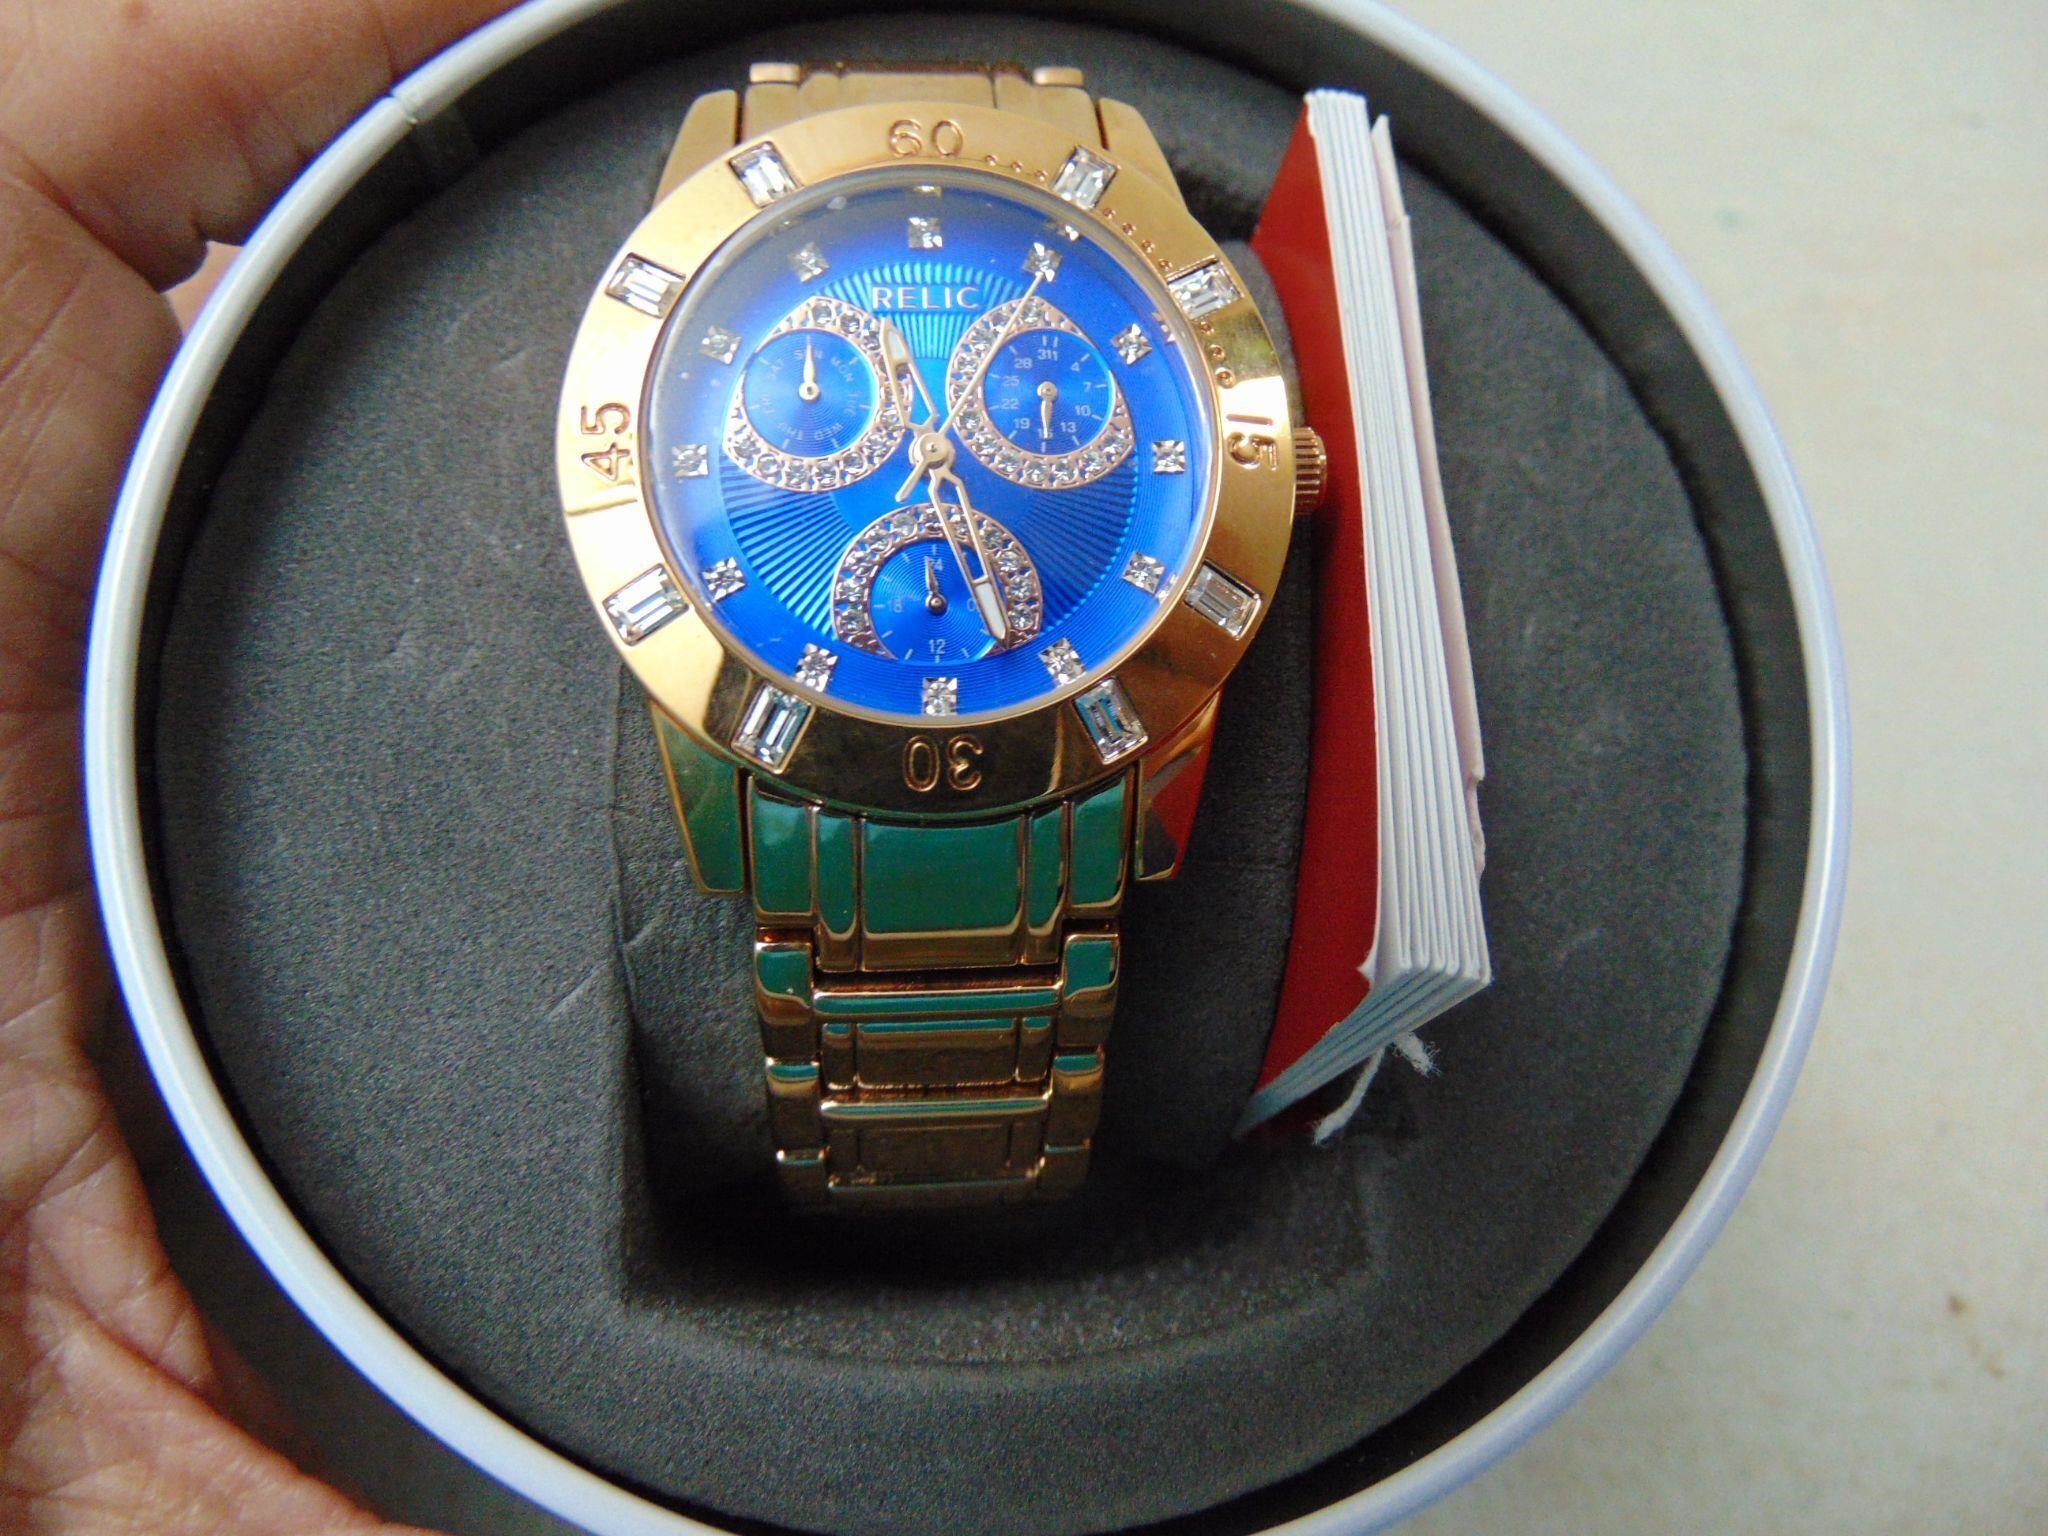 Relic Watch - New, needs new battery.